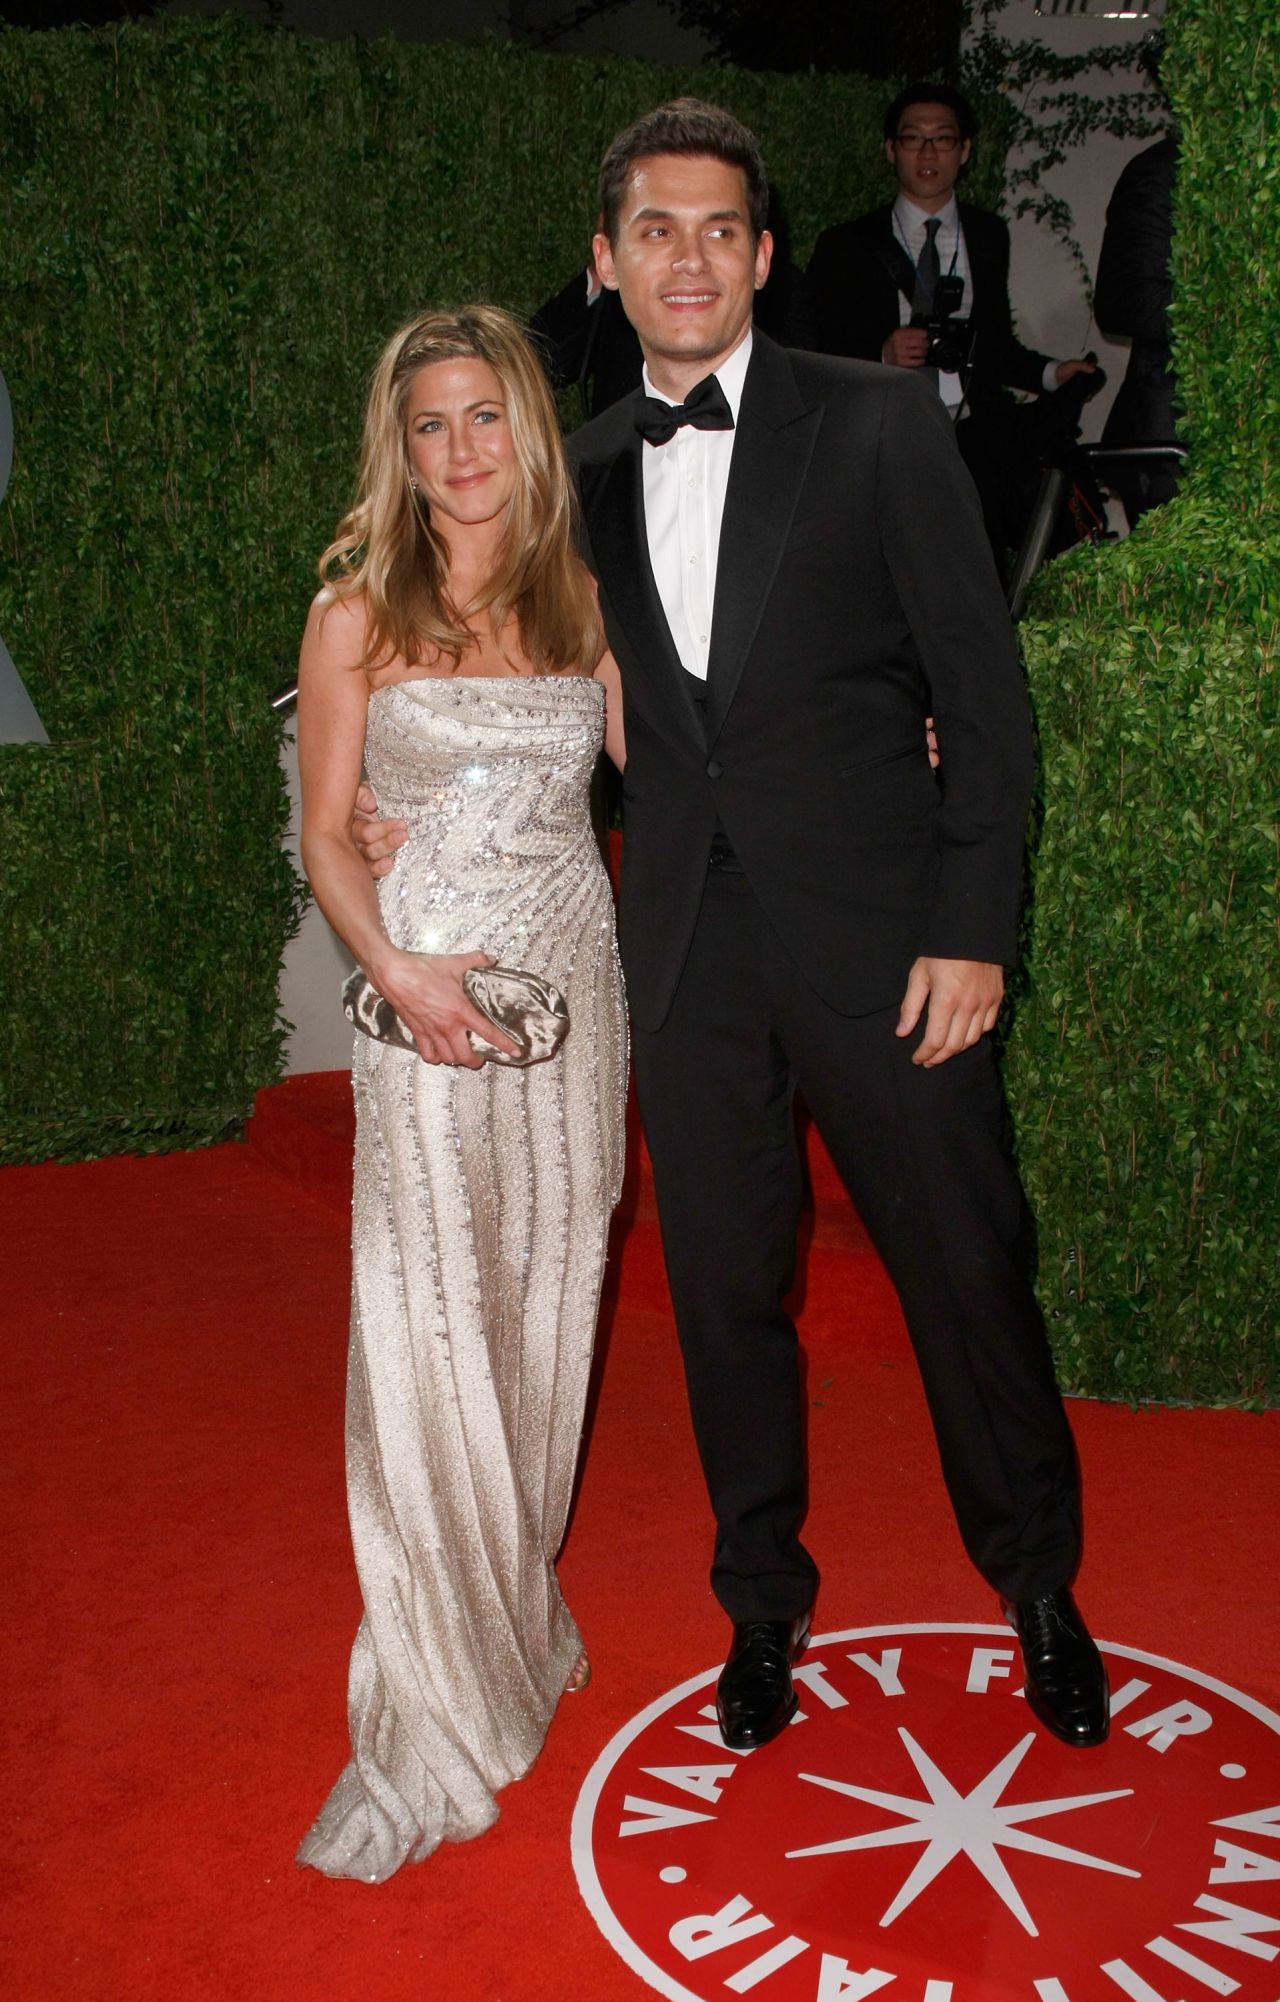 John Mayer and Aniston, pictured here in 2009, dated on and off for about a year. Though his <a href="http://marquee.blogs.cnn.com/2012/05/22/john-mayer-says-his-shadow-days-are-over/" target="_blank">"Shadow Days" are over</a> now, in 2010 Mayer opened up to <a href="http://www.rollingstone.com/music/news/john-mayers-dirty-mind-lonely-heart-new-issue-of-rolling-stone-20100119" target="_blank" target="_blank">Rolling Stone</a> about his split with Aniston, saying, "I've never really gotten over it. It was one of the worst times of my life."